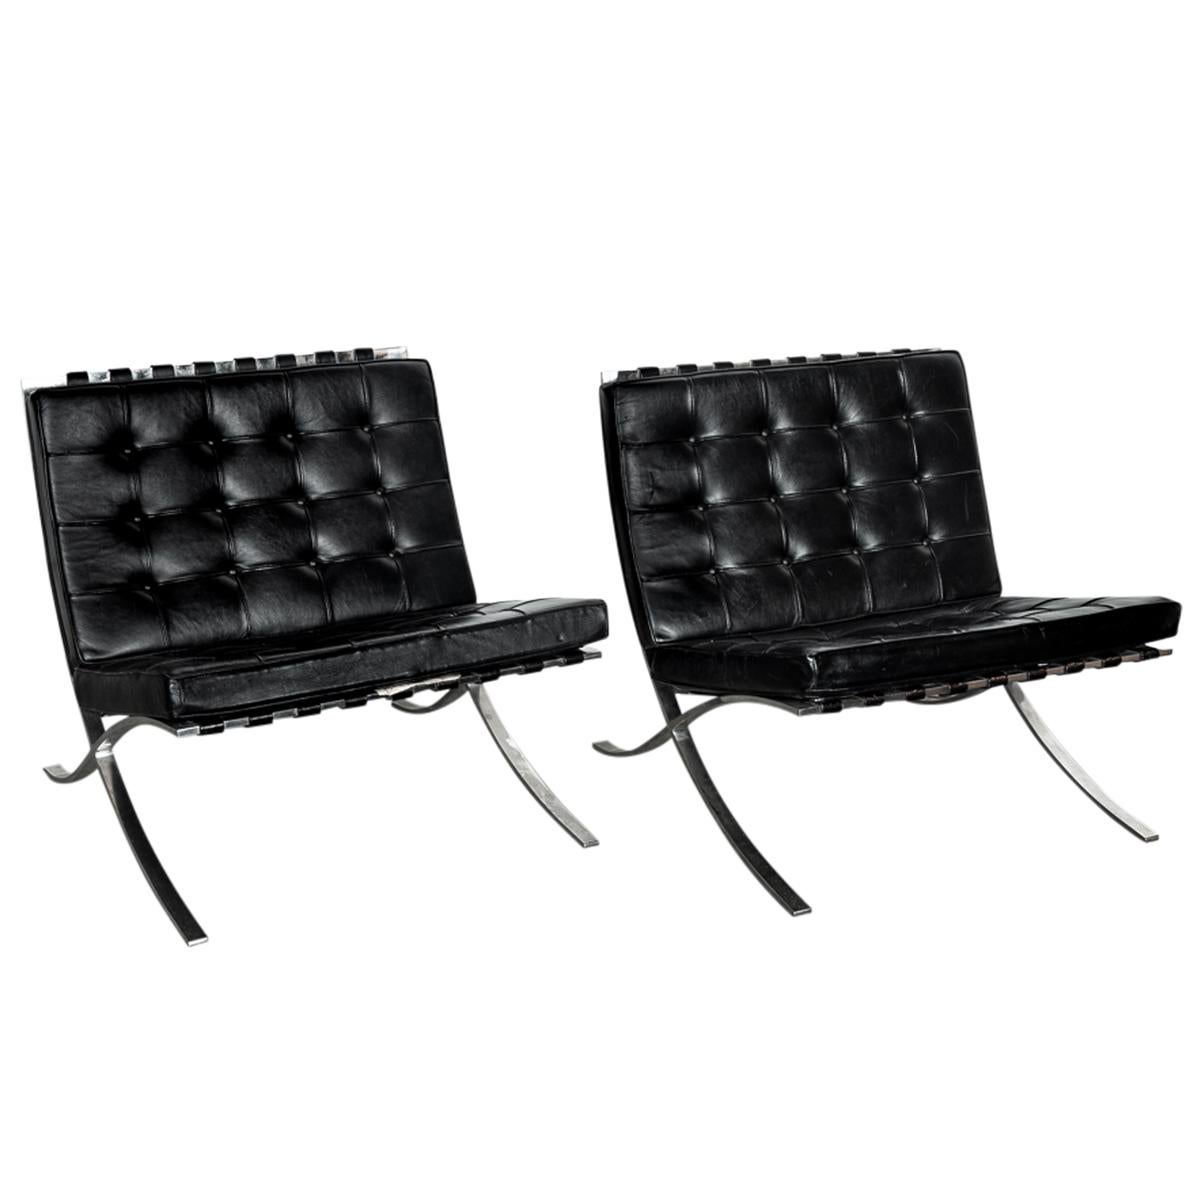 Bauhaus Early Pair MCM Knoll Barcelona Chairs Black Leather Mies van der Rohe 1961 For Sale